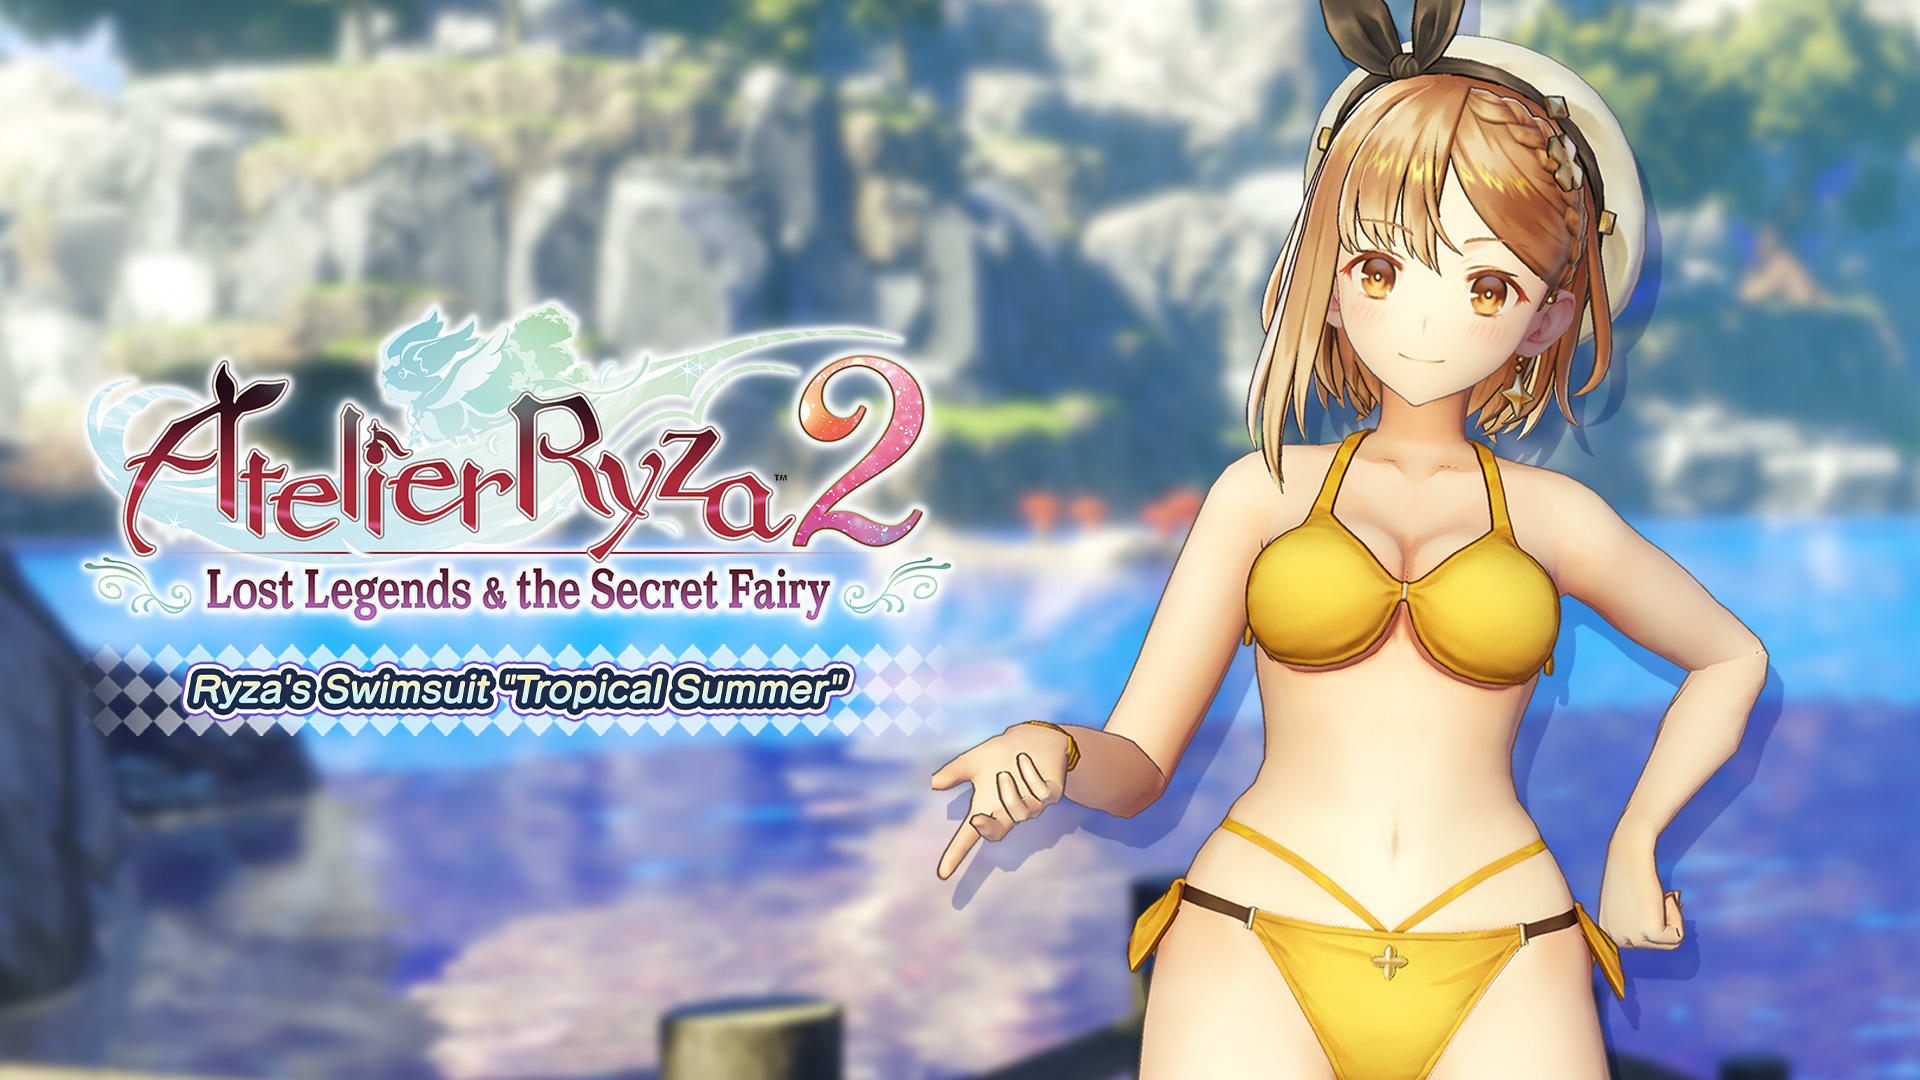 Ryza's Swimsuit "Tropical Summer"